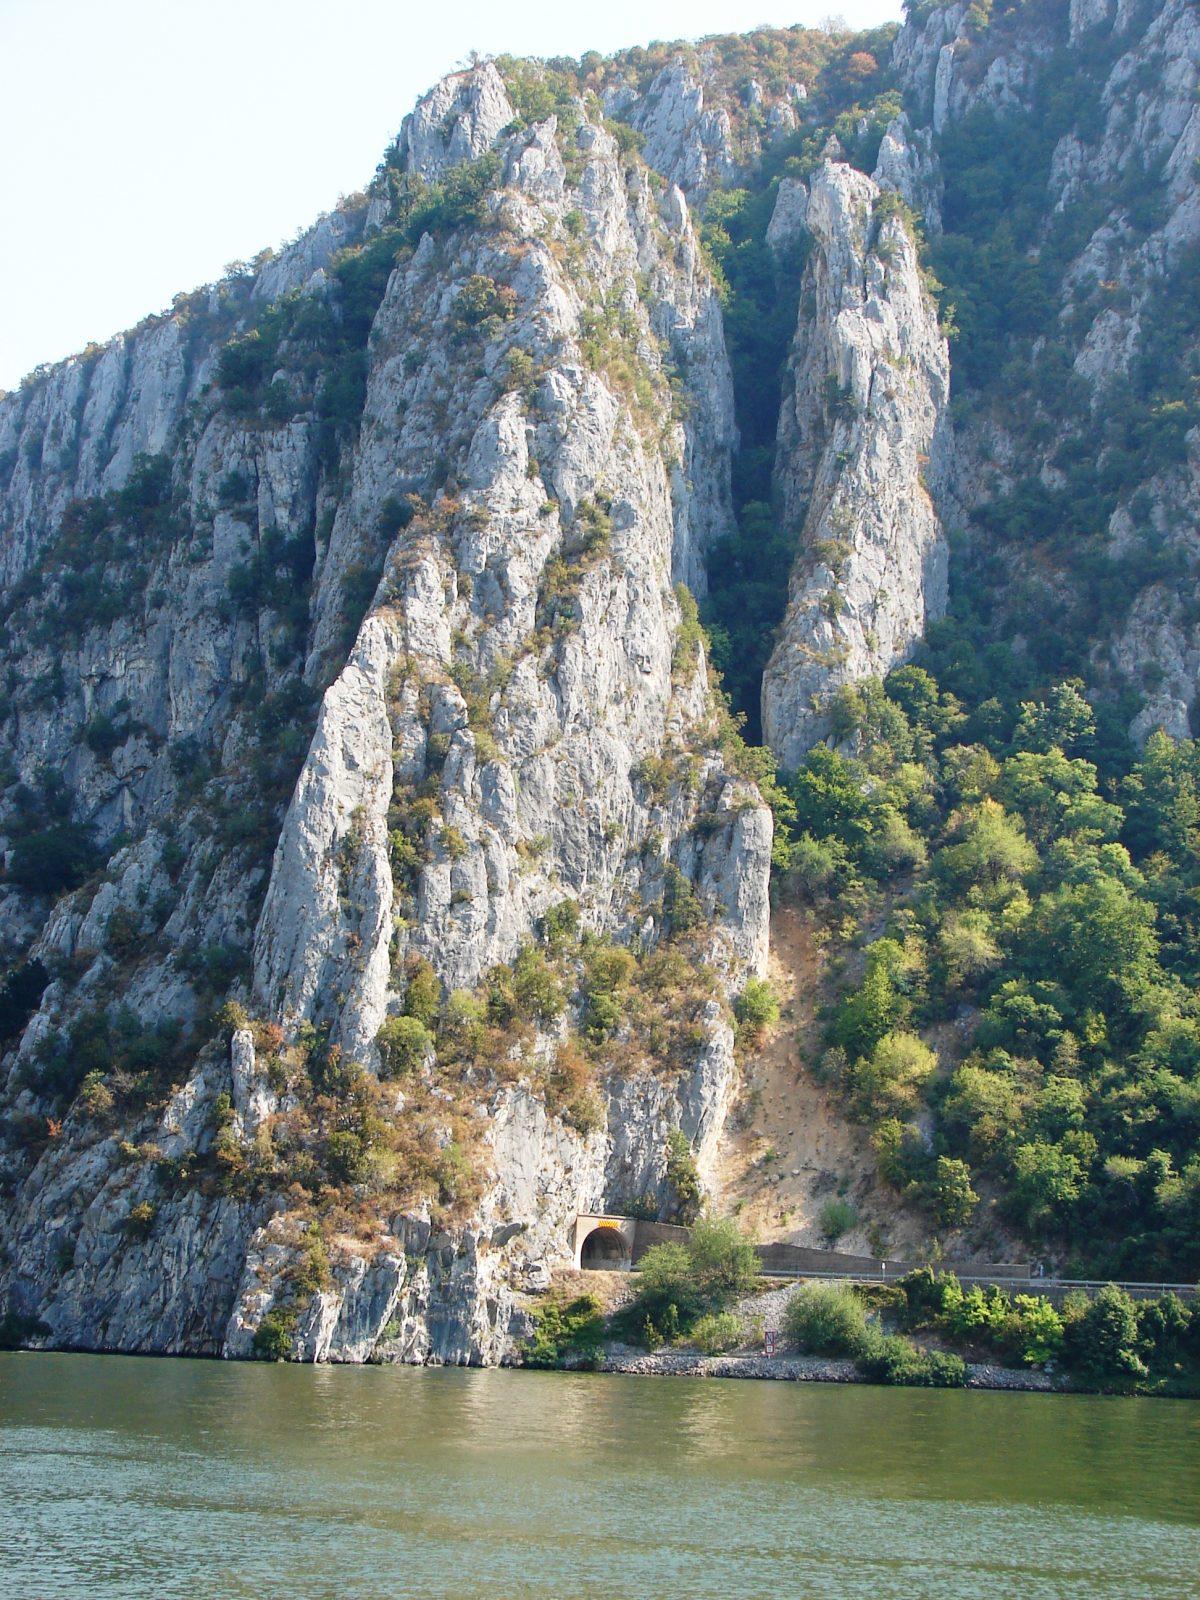 There are some steep cliffs and rock tunnels along this section of the Danube River. (John M. Smith)